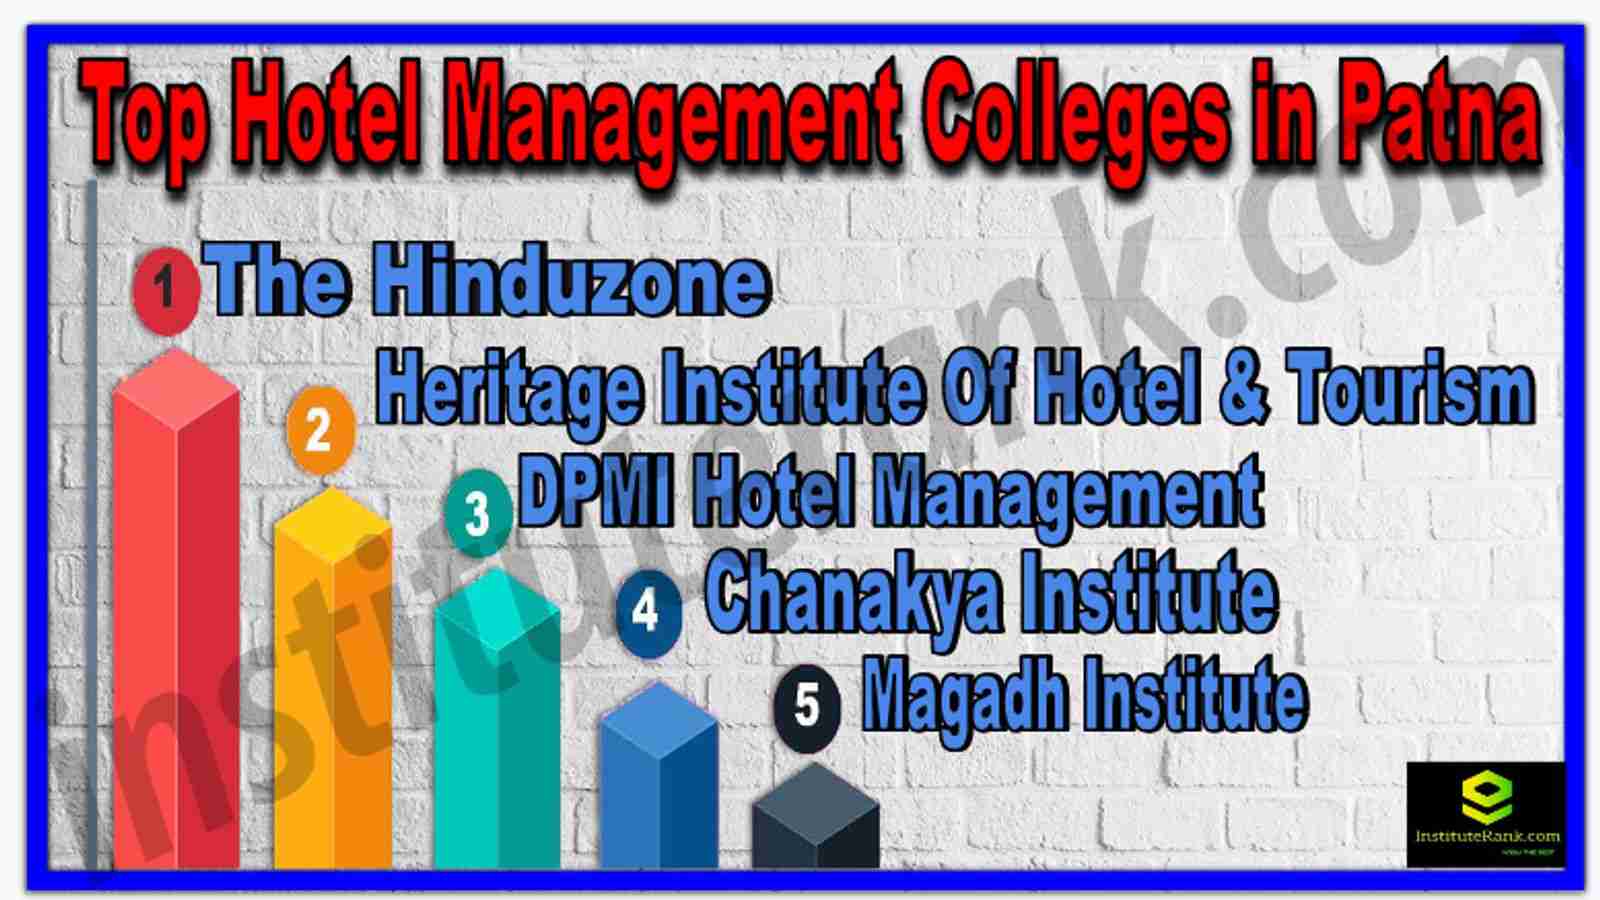 Top Hotel Management Colleges in Patna